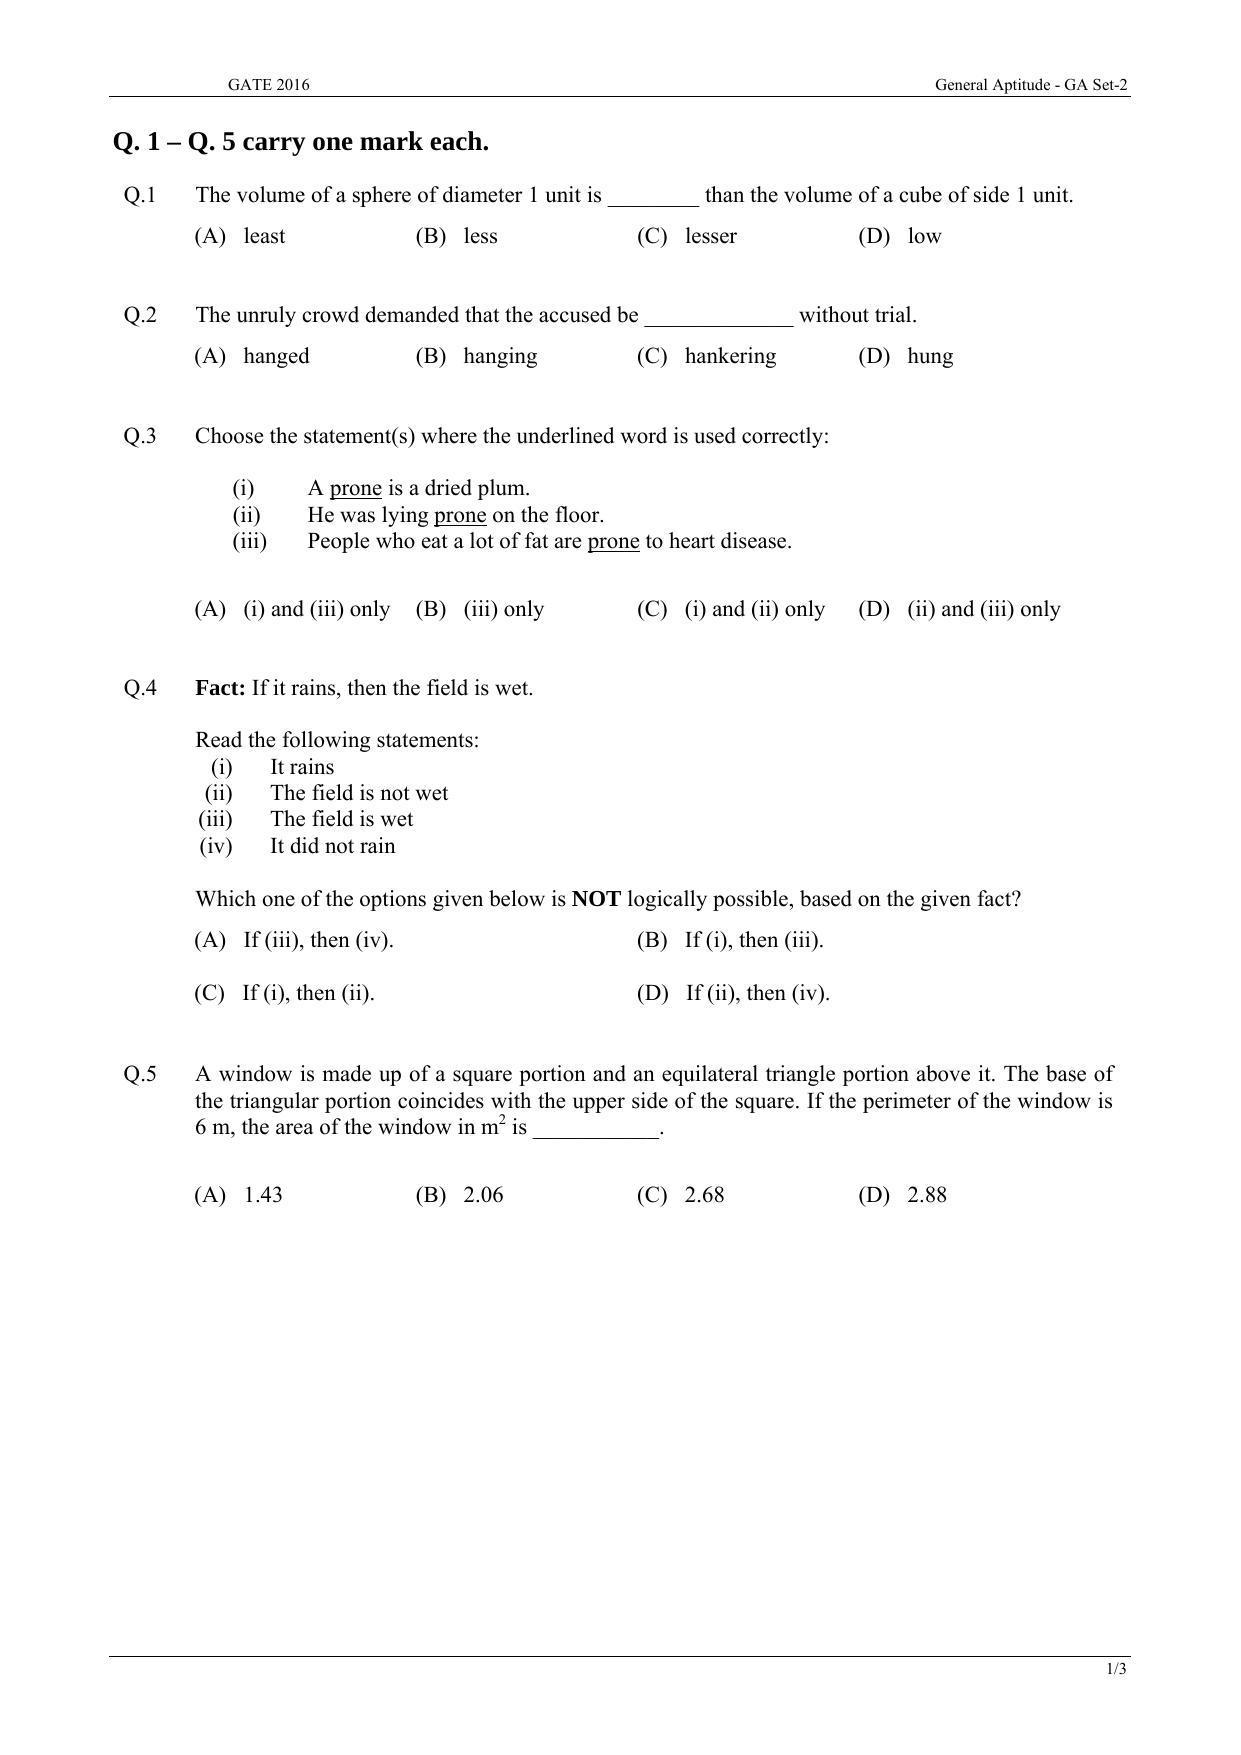 GATE 2016 Physics (PH) Question Paper with Answer Key - Page 1